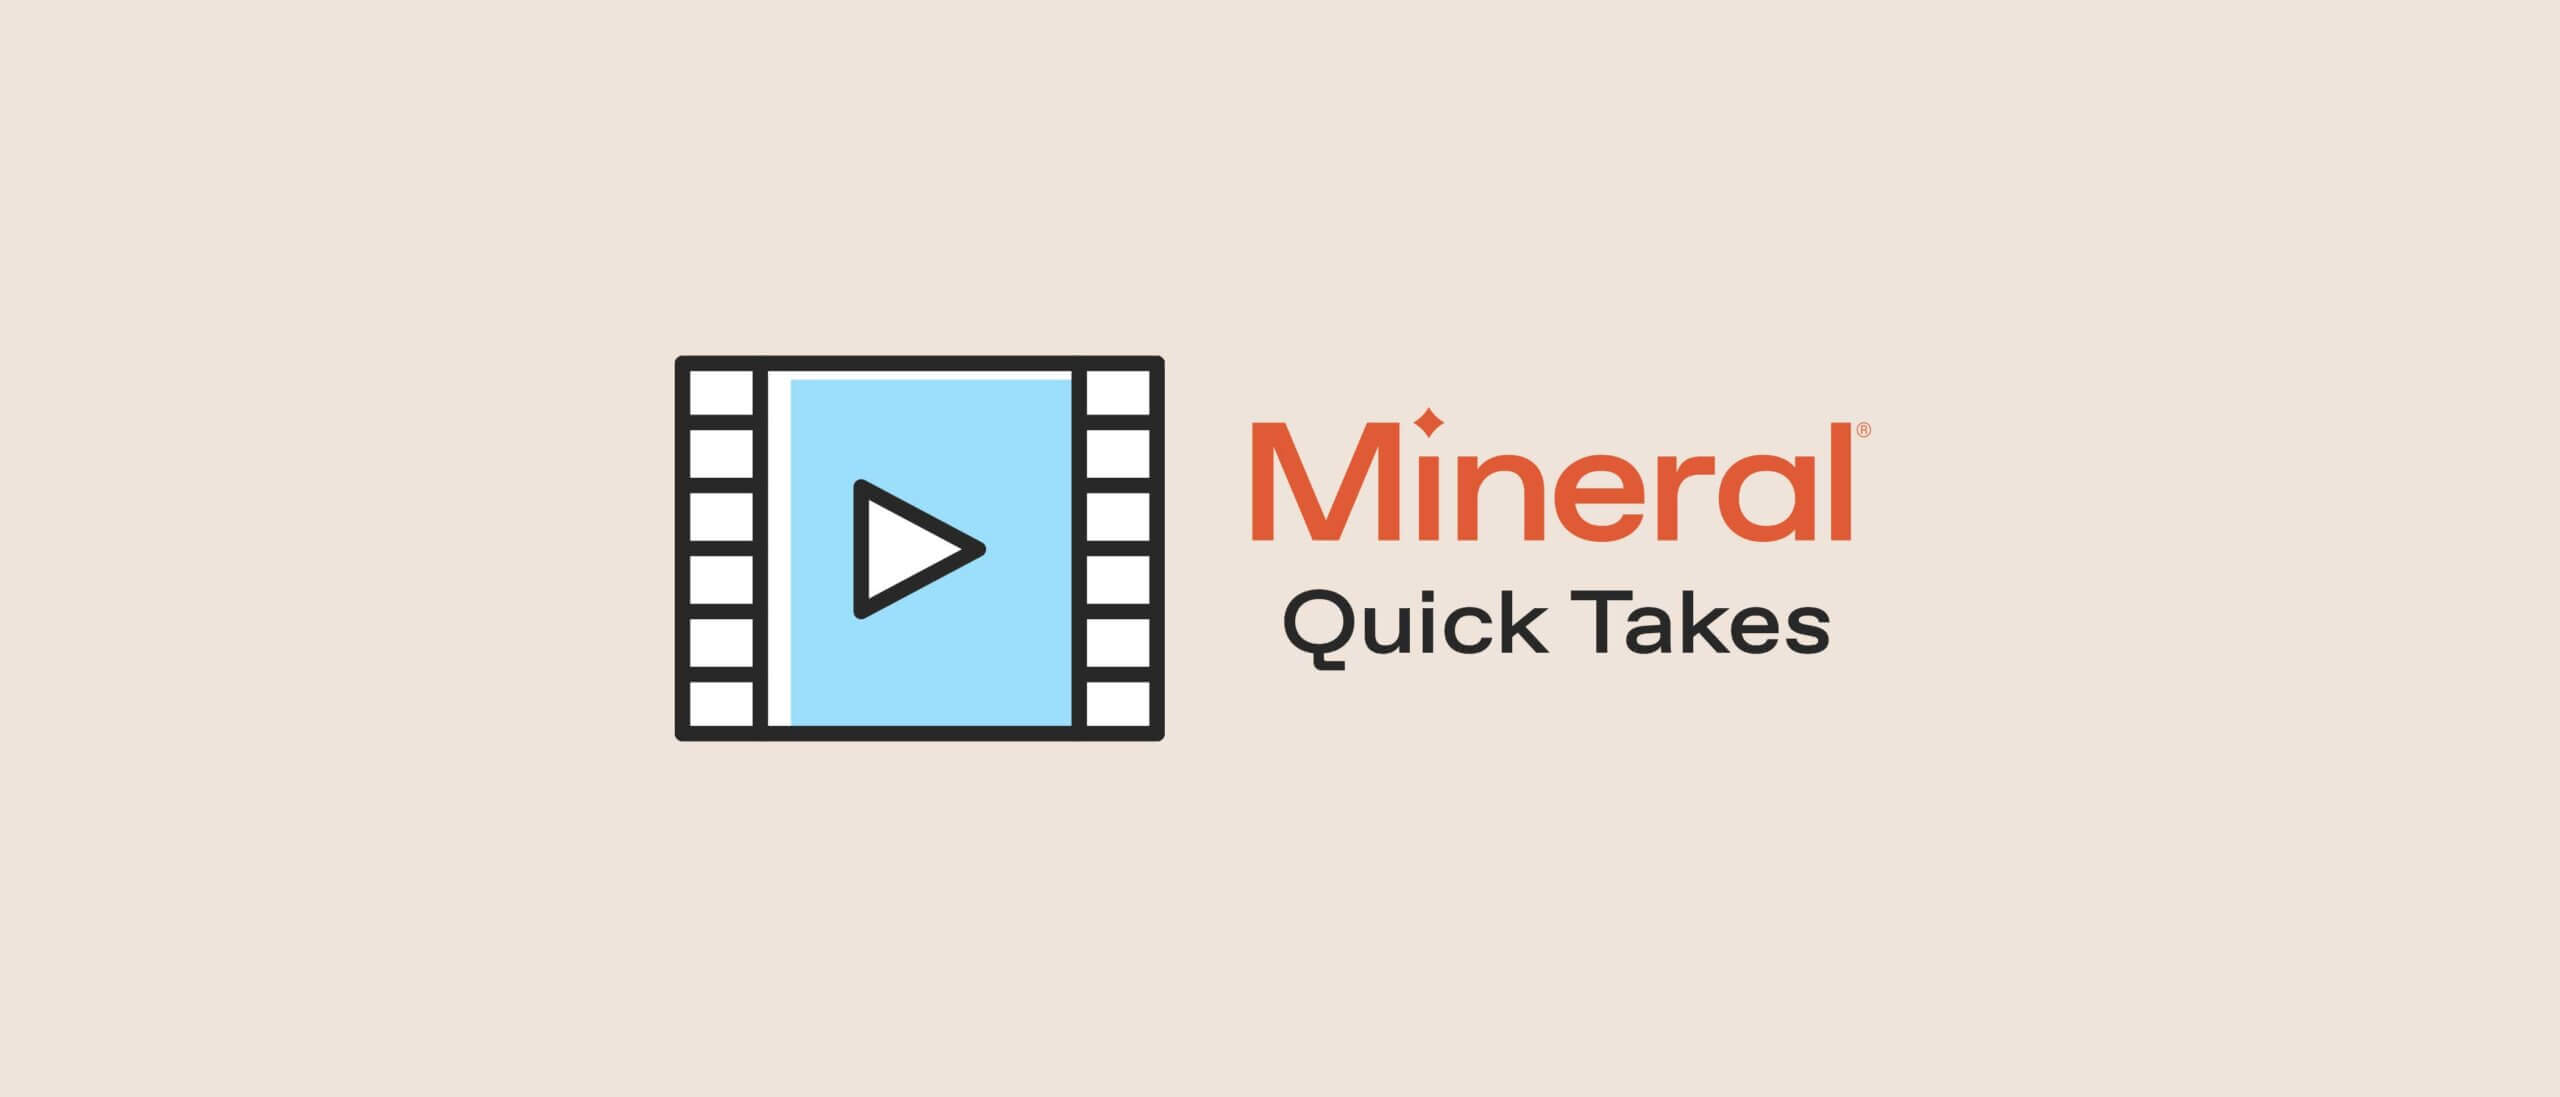 Mineral Quick Take Video Thumbnails